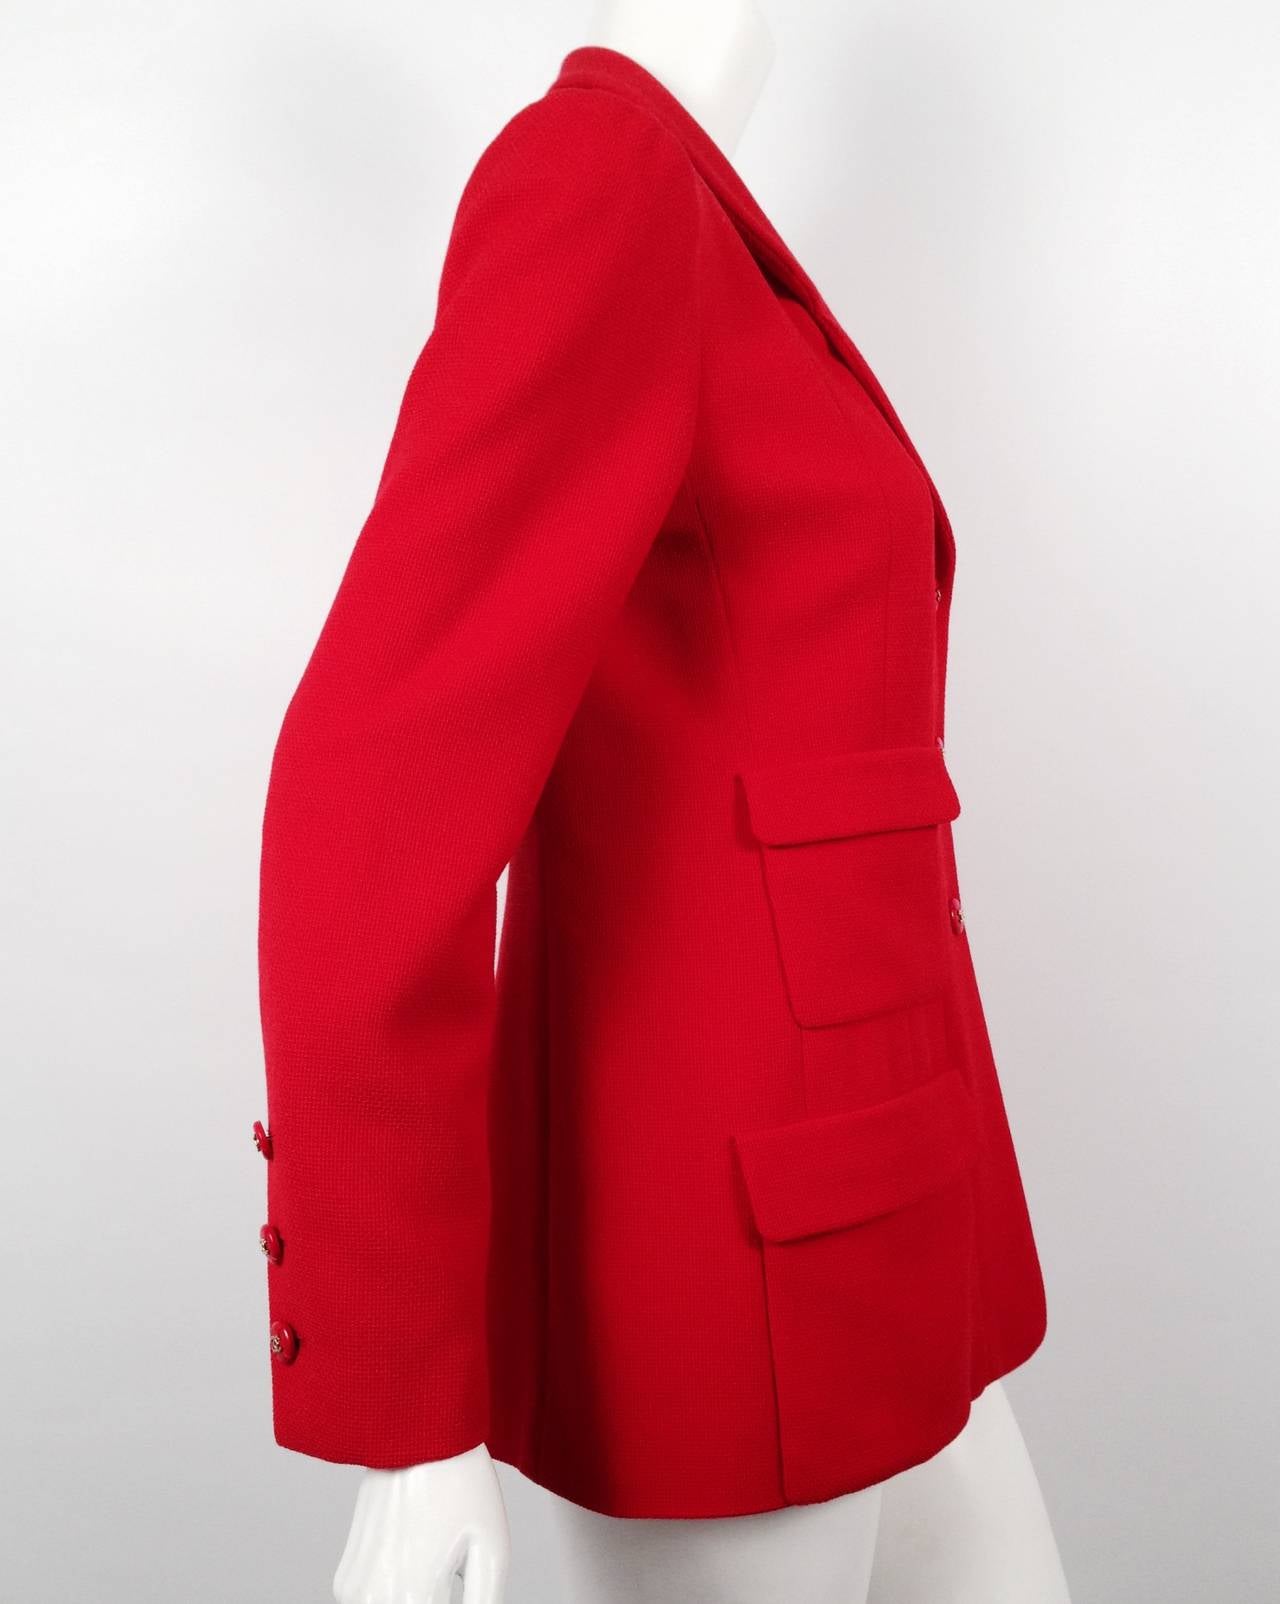 Chanel Red Pique Fabric Jacket 1